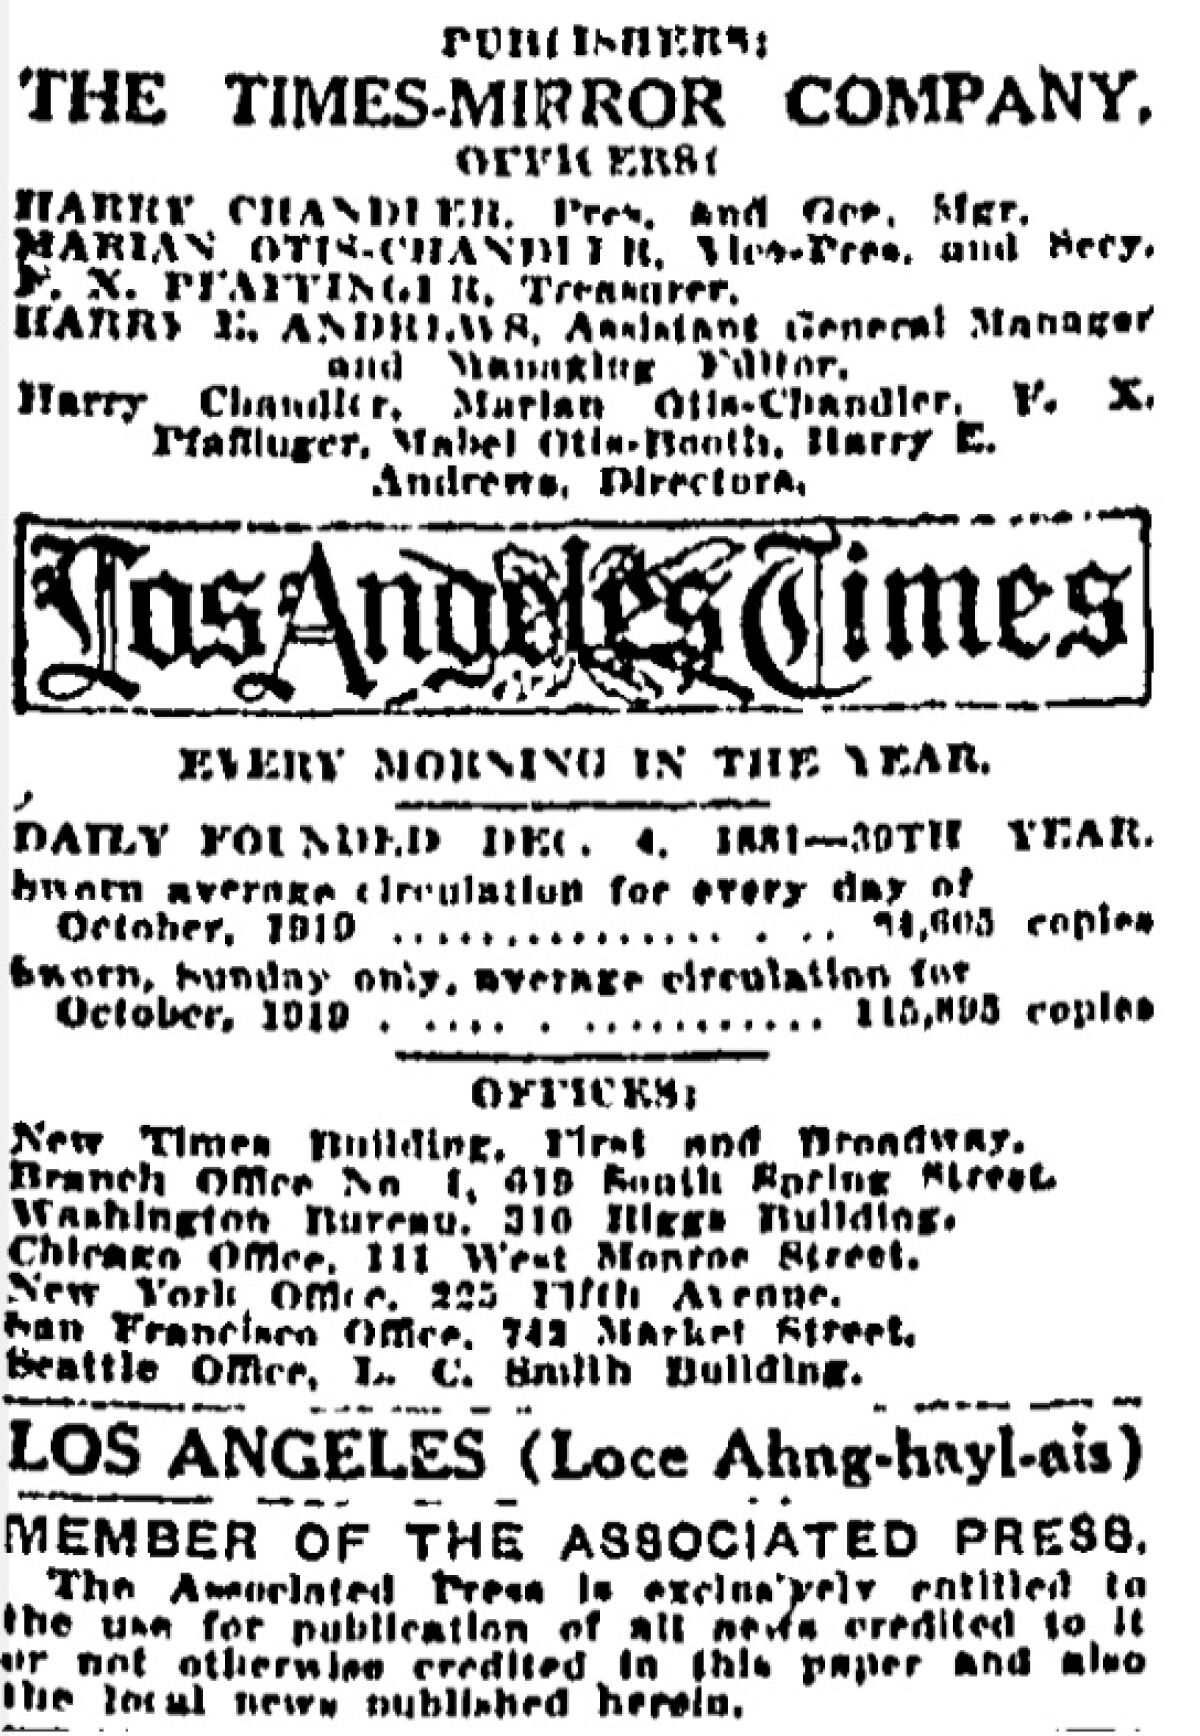 The relevant part of the text reads: "LOS ANGELES (Loce Ahng-hayl-ais)